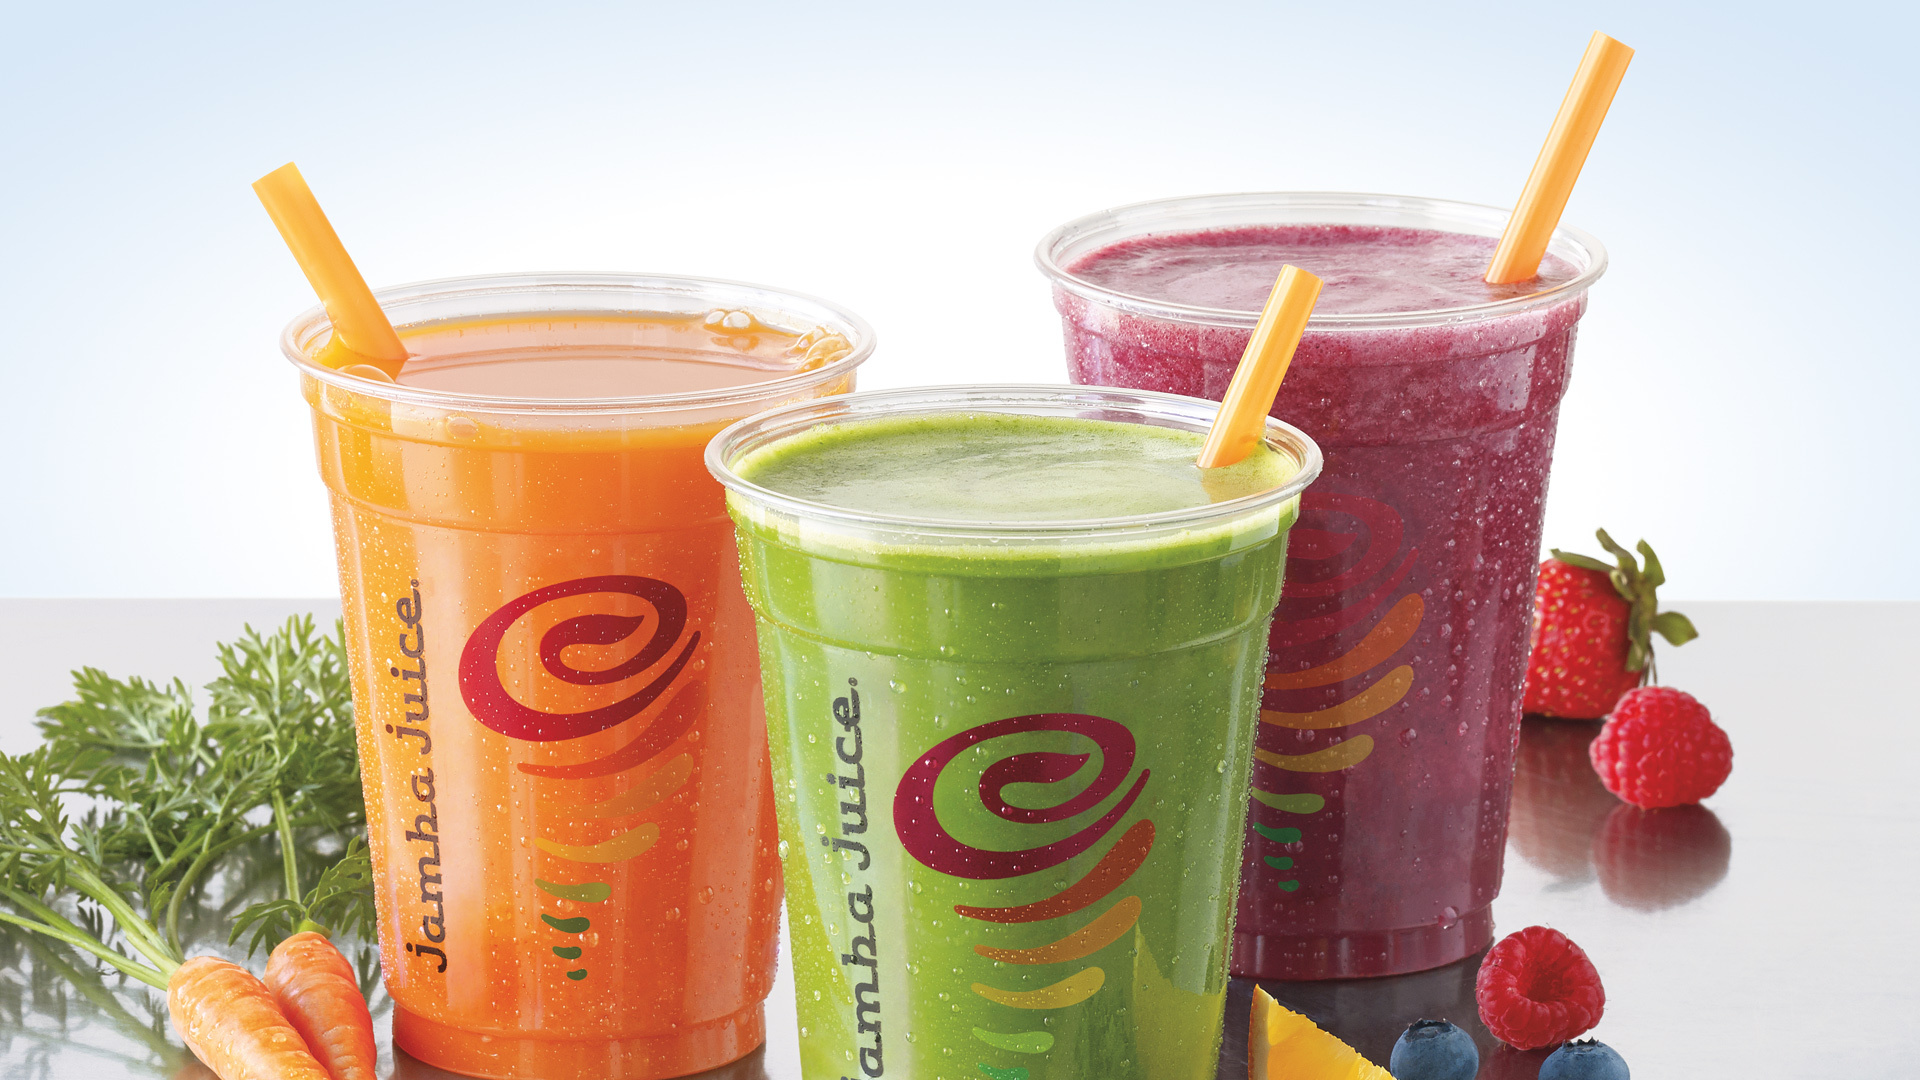 Here’s how to get a free $3 Jamba Juice gift card